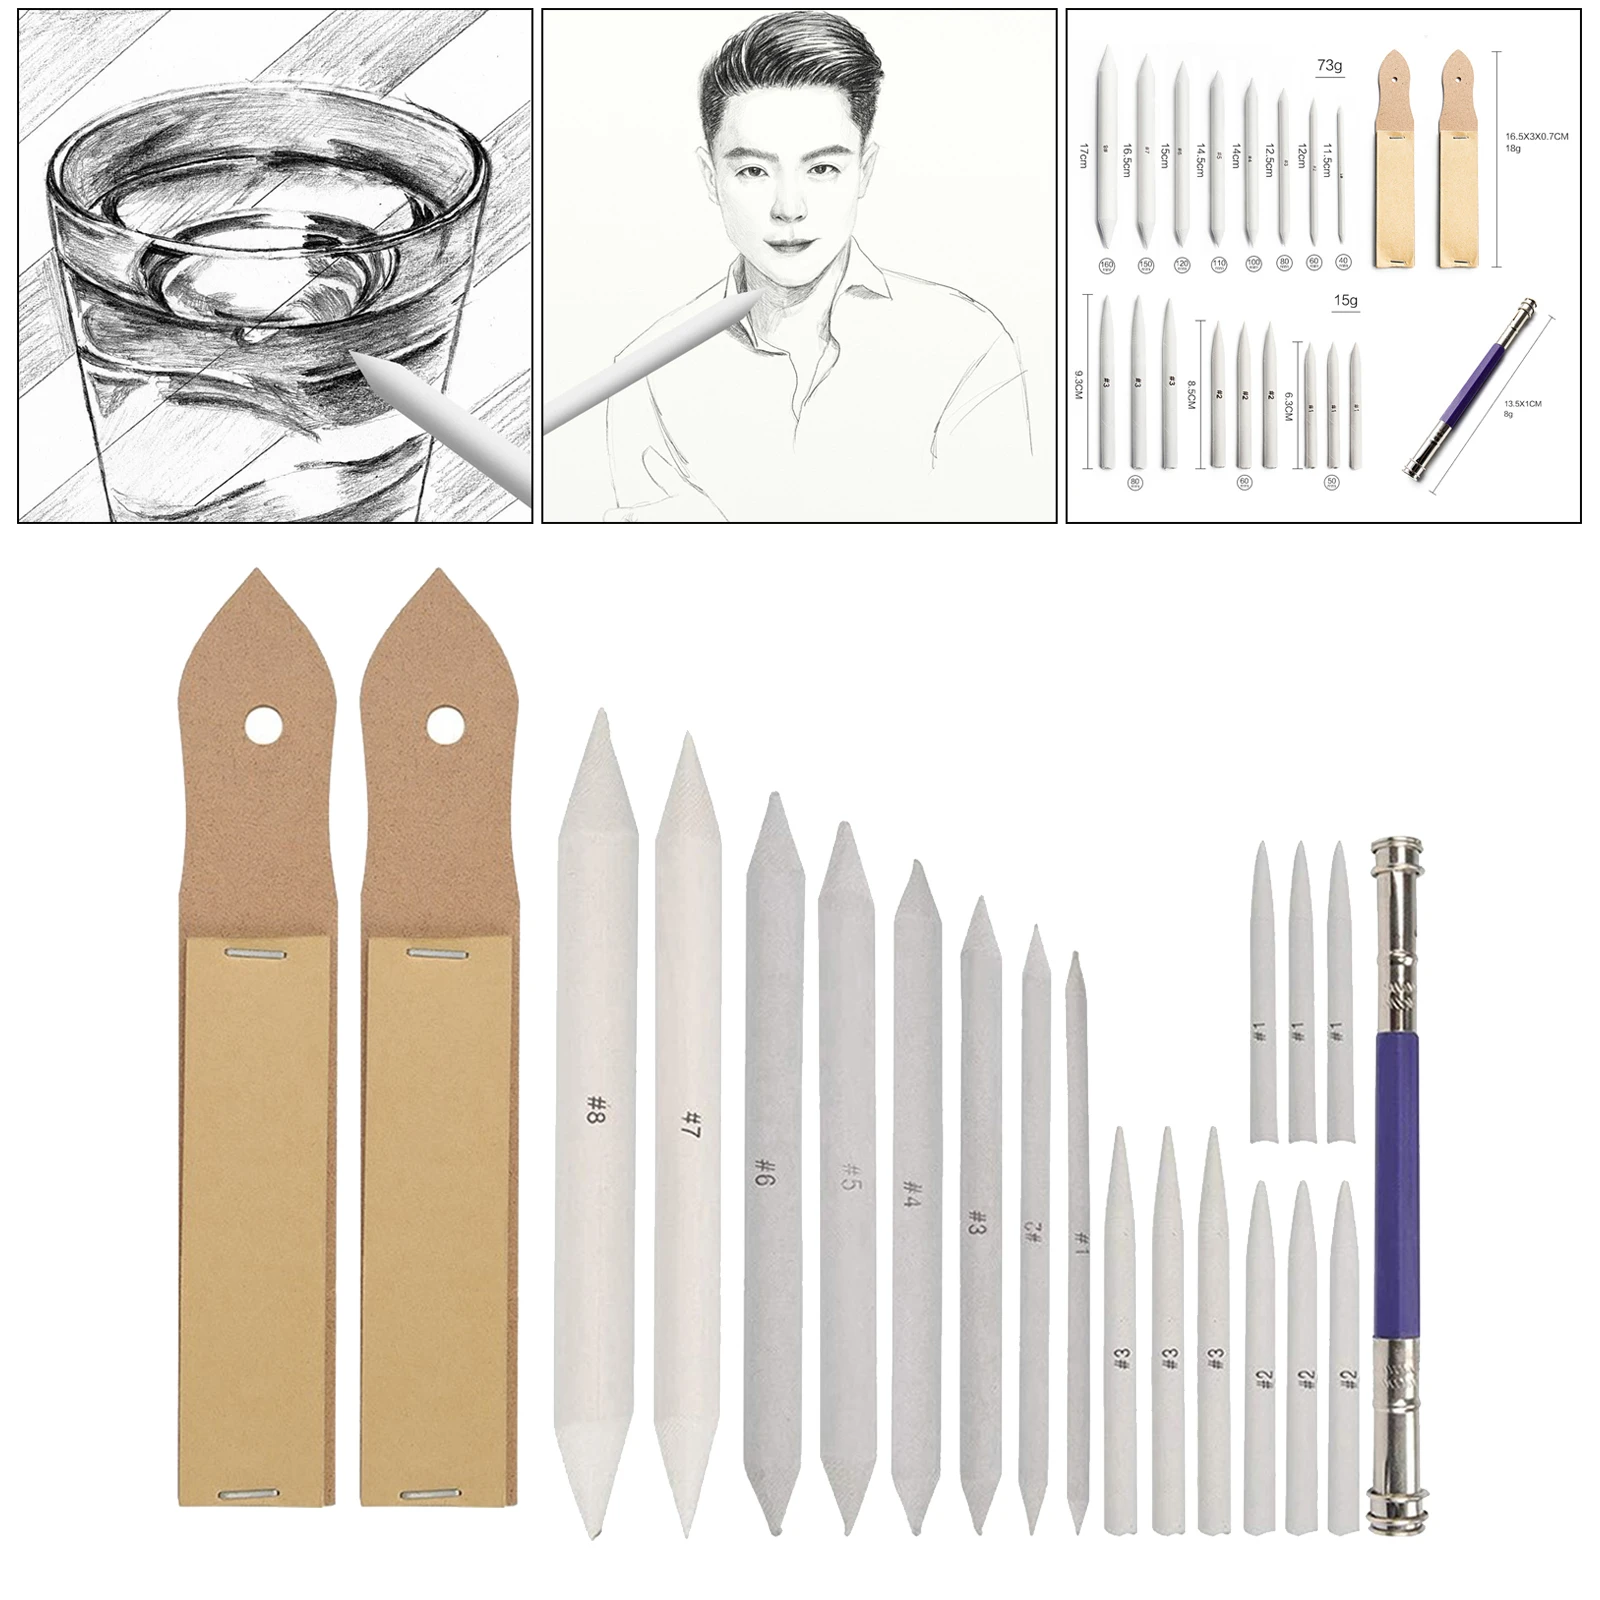 22 Pieces Blending Stumps and Tortillions Set with 2 Sandpaper Pencil Sharpener 1 Pencil Extension Tool and 1 Eraser for Student Sketch Drawing Accessories 